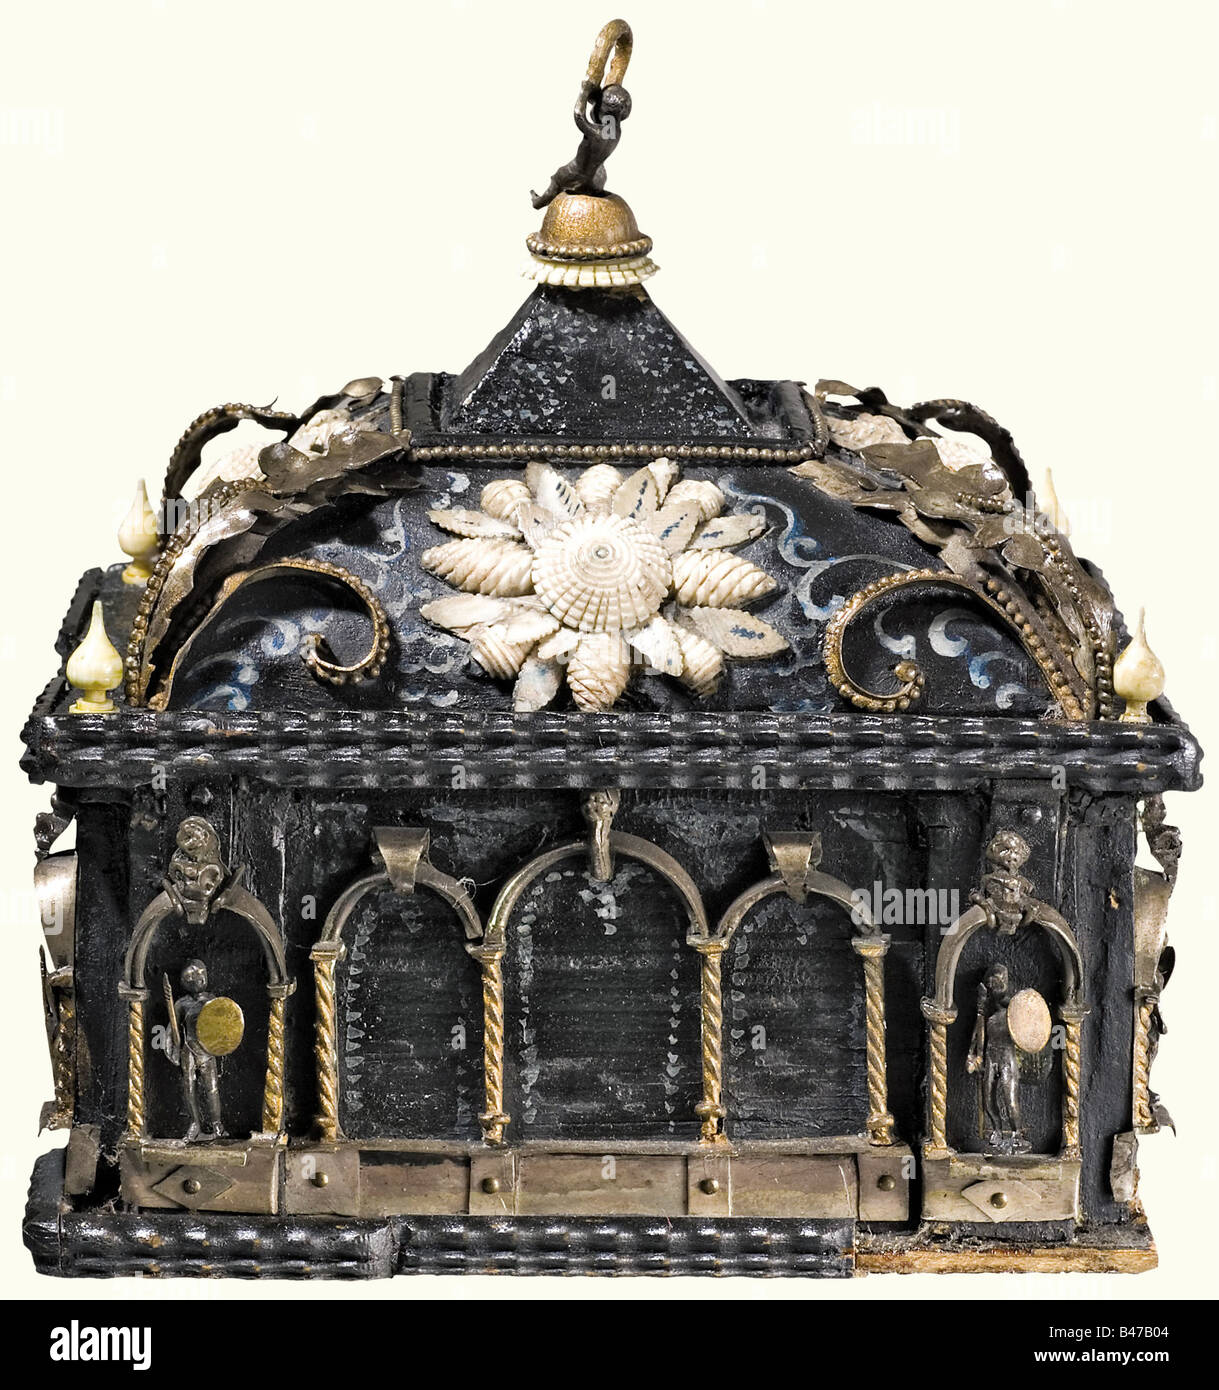 A splendid casket, German or Italian, 2nd half of the 17th century Casket of dark painted wood richly mounted with decorative brass, and bone fittings. Rectangular body with rounded corners and flamed edging. Surrounded with superimposed brass arcades in fine relief. Two figures set on each side: two crossbowmen on the front and warriors with spear and shield on the sides and in back. There are finely tuned columns of bone on the front edges. Cambered lid decorated with finely carved bone, with brass Ornaments on the edges. There is a pyramid shaped mounting on, Stock Photo